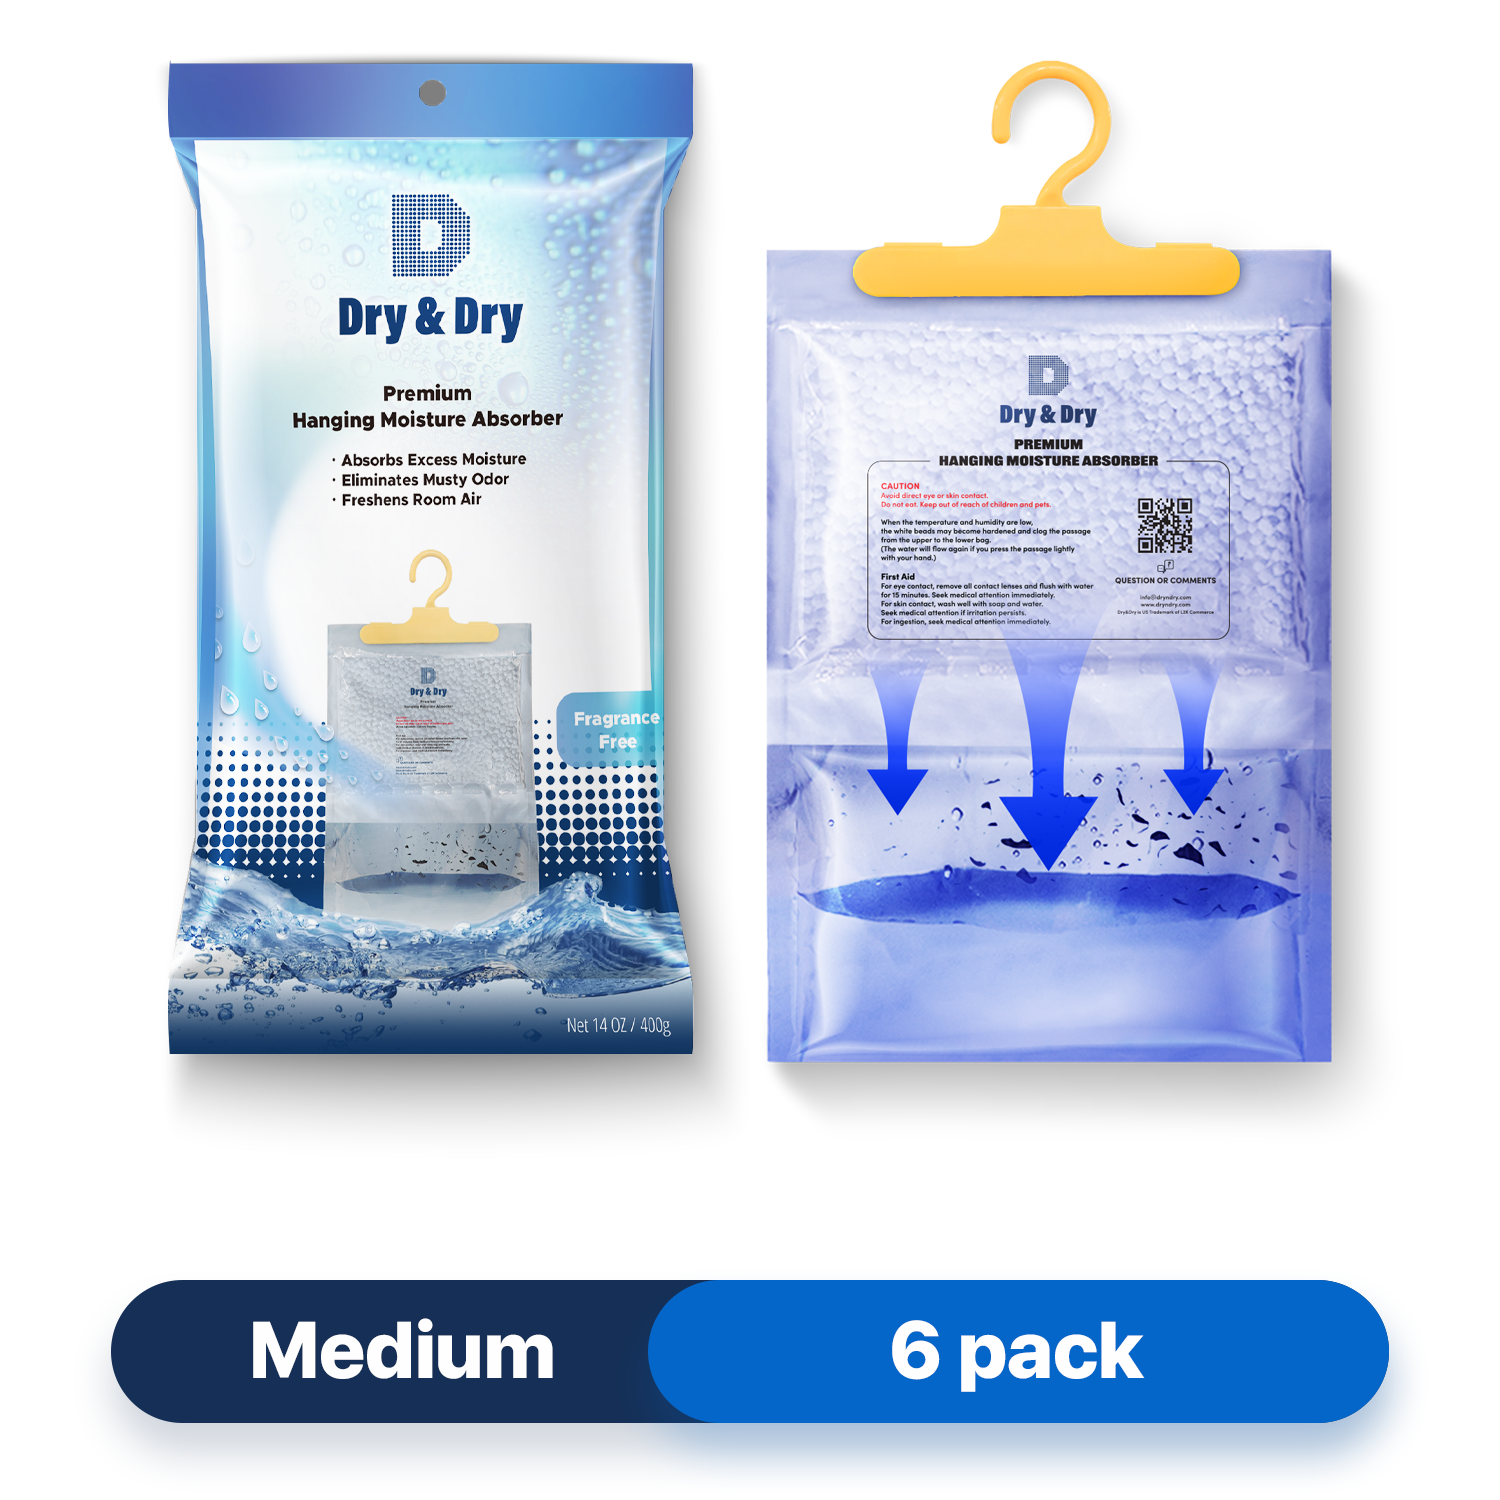 [6 pack] [Net 7 oz/Pack]  “Dry & Dry” Premium Hanging Moisture Absorber to Control Excess Moisture for Basements, Bathrooms, Laundry Rooms, and Enclosed Spaces